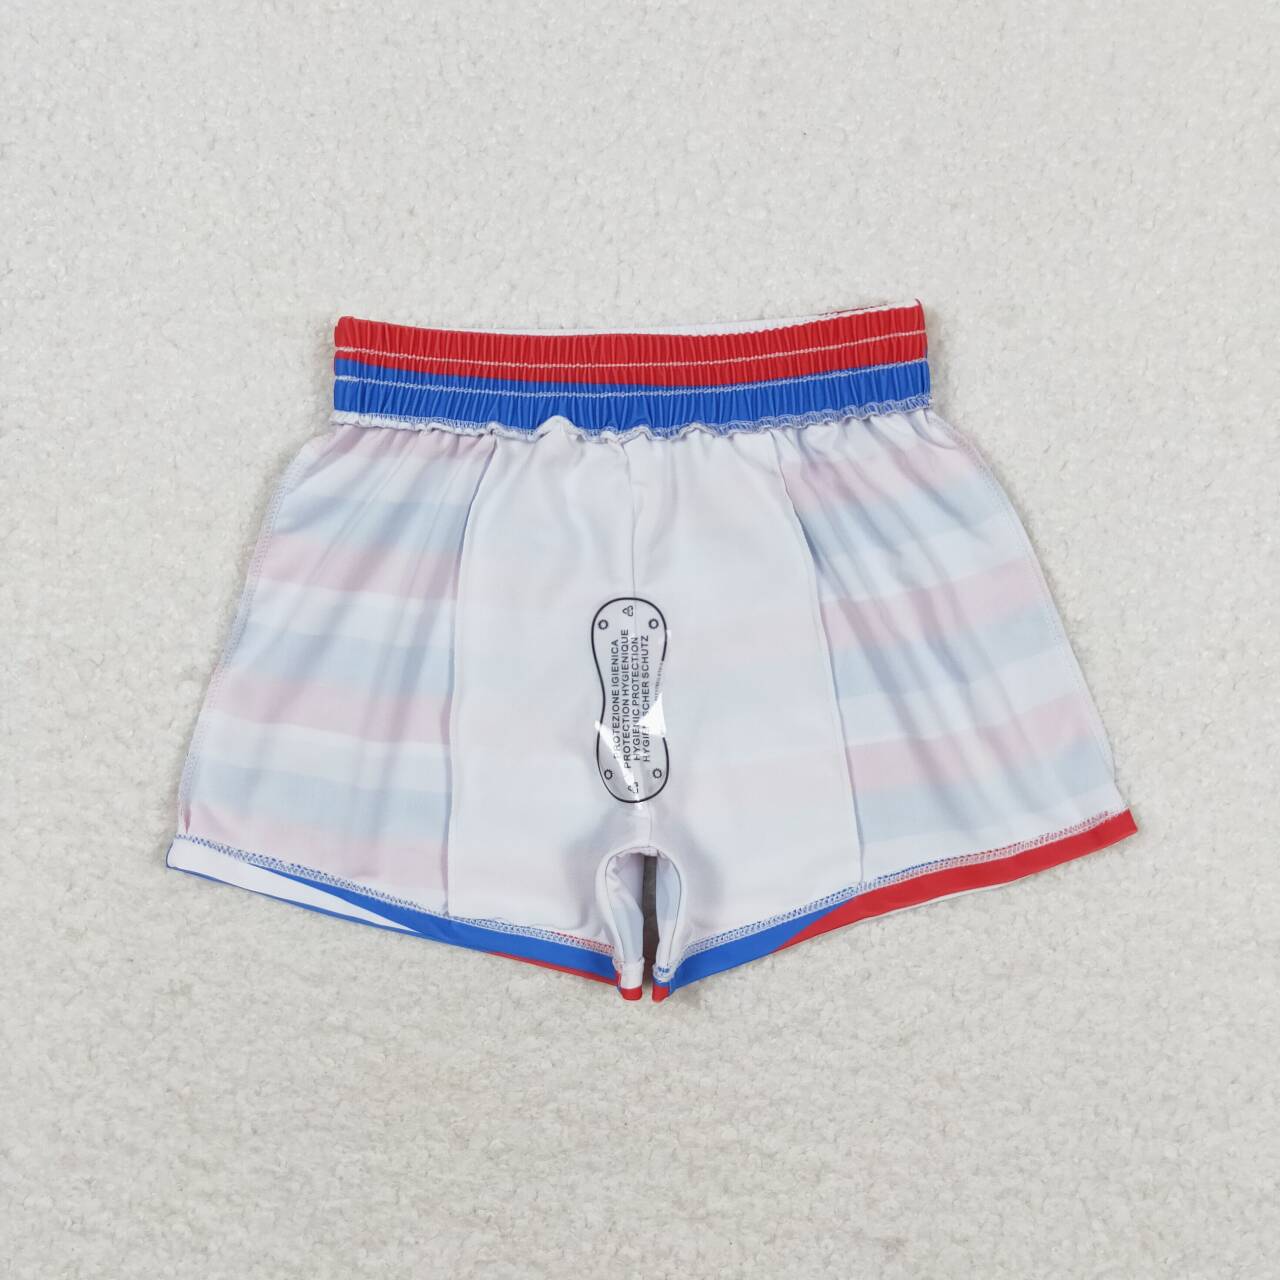 S0233 Red and blue striped swimming trunks